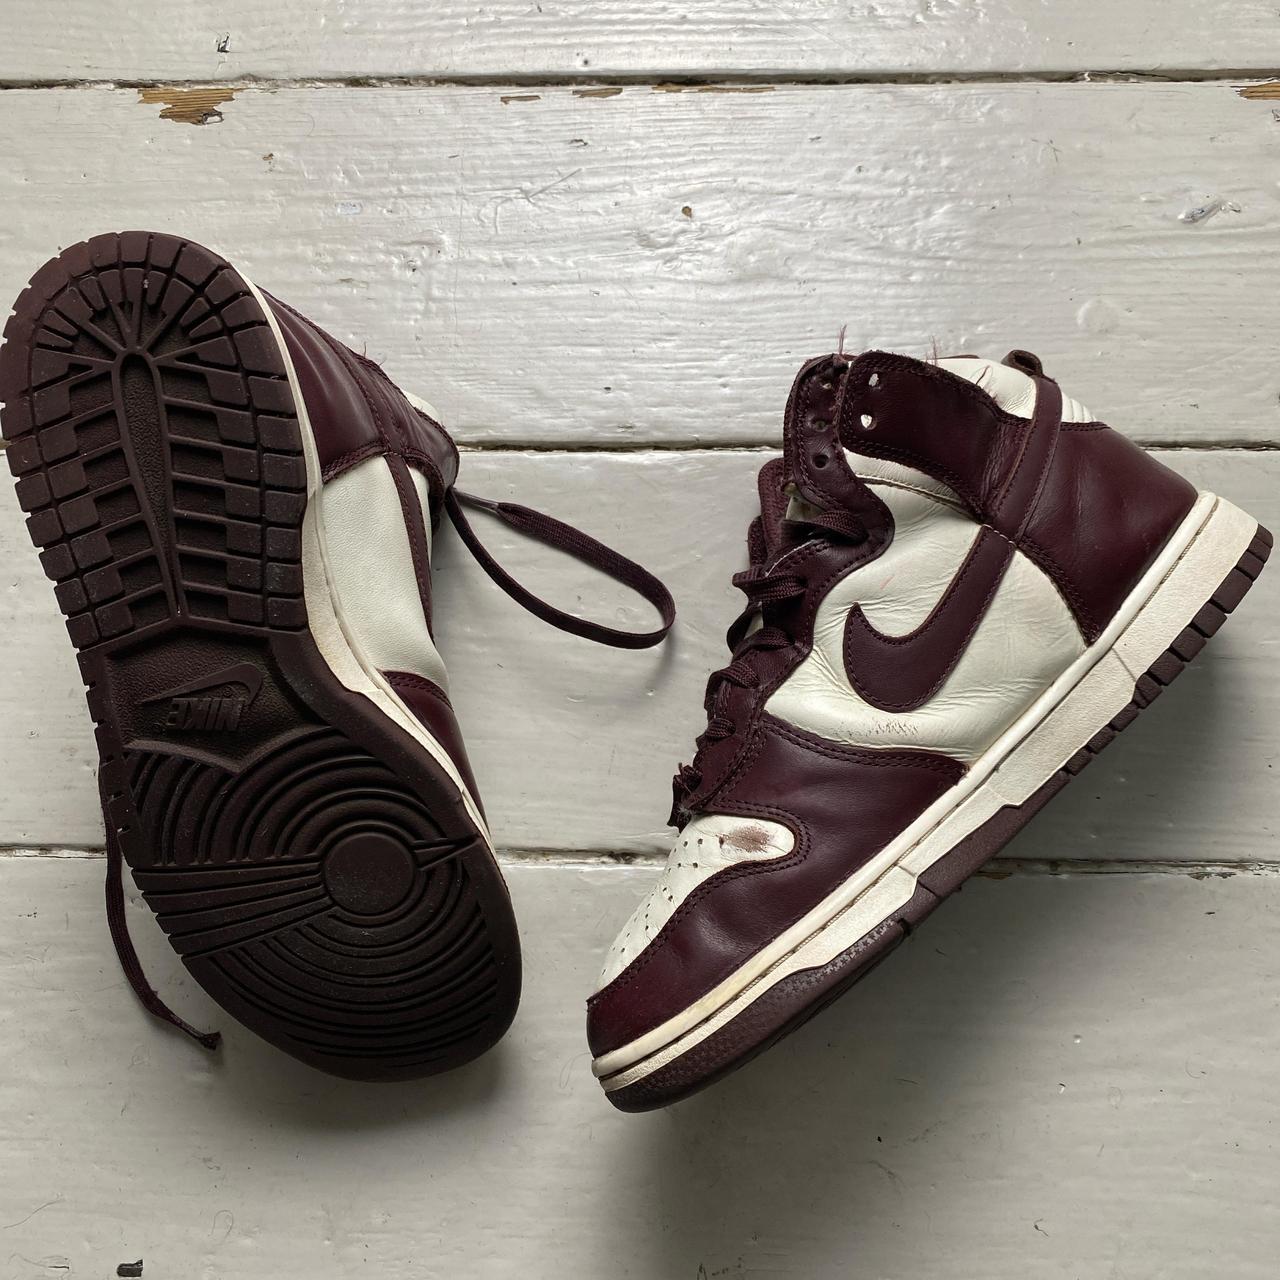 Nike Dunk Brown and White High Top